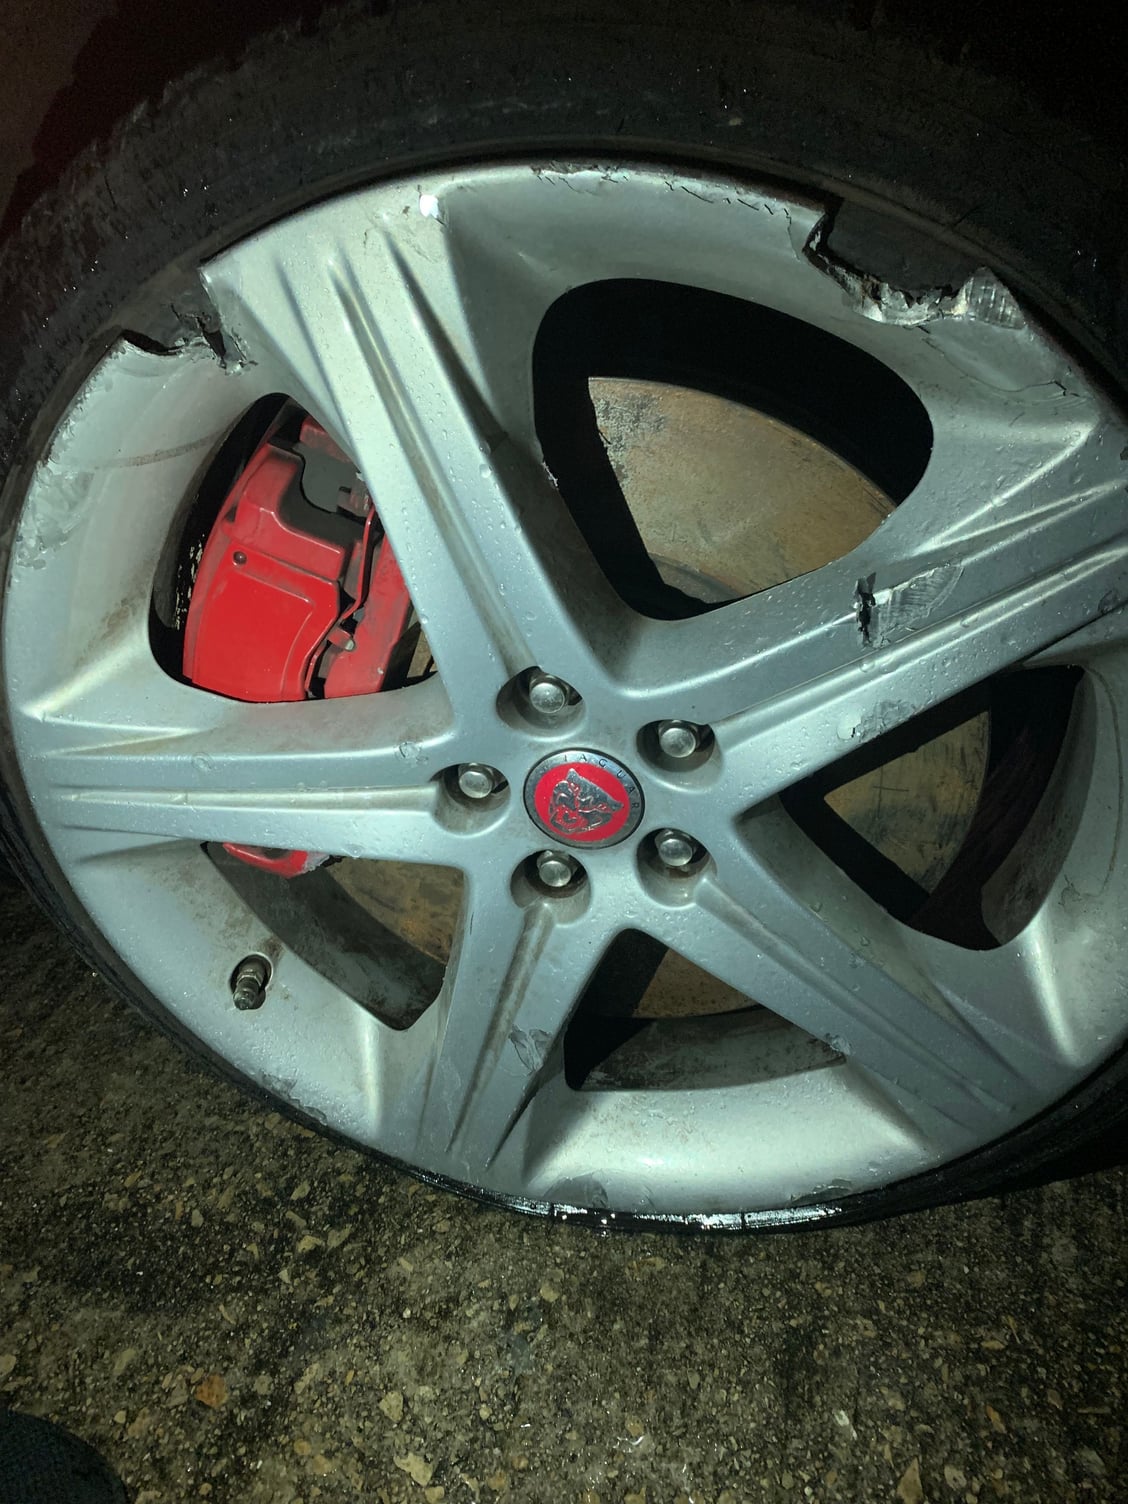 Wheels and Tires/Axles - WANTED: Takoba Front Rim for a 2013 XKR - Used - 2013 to 2015 Jaguar XKR - Chicago, IL 60640, United States